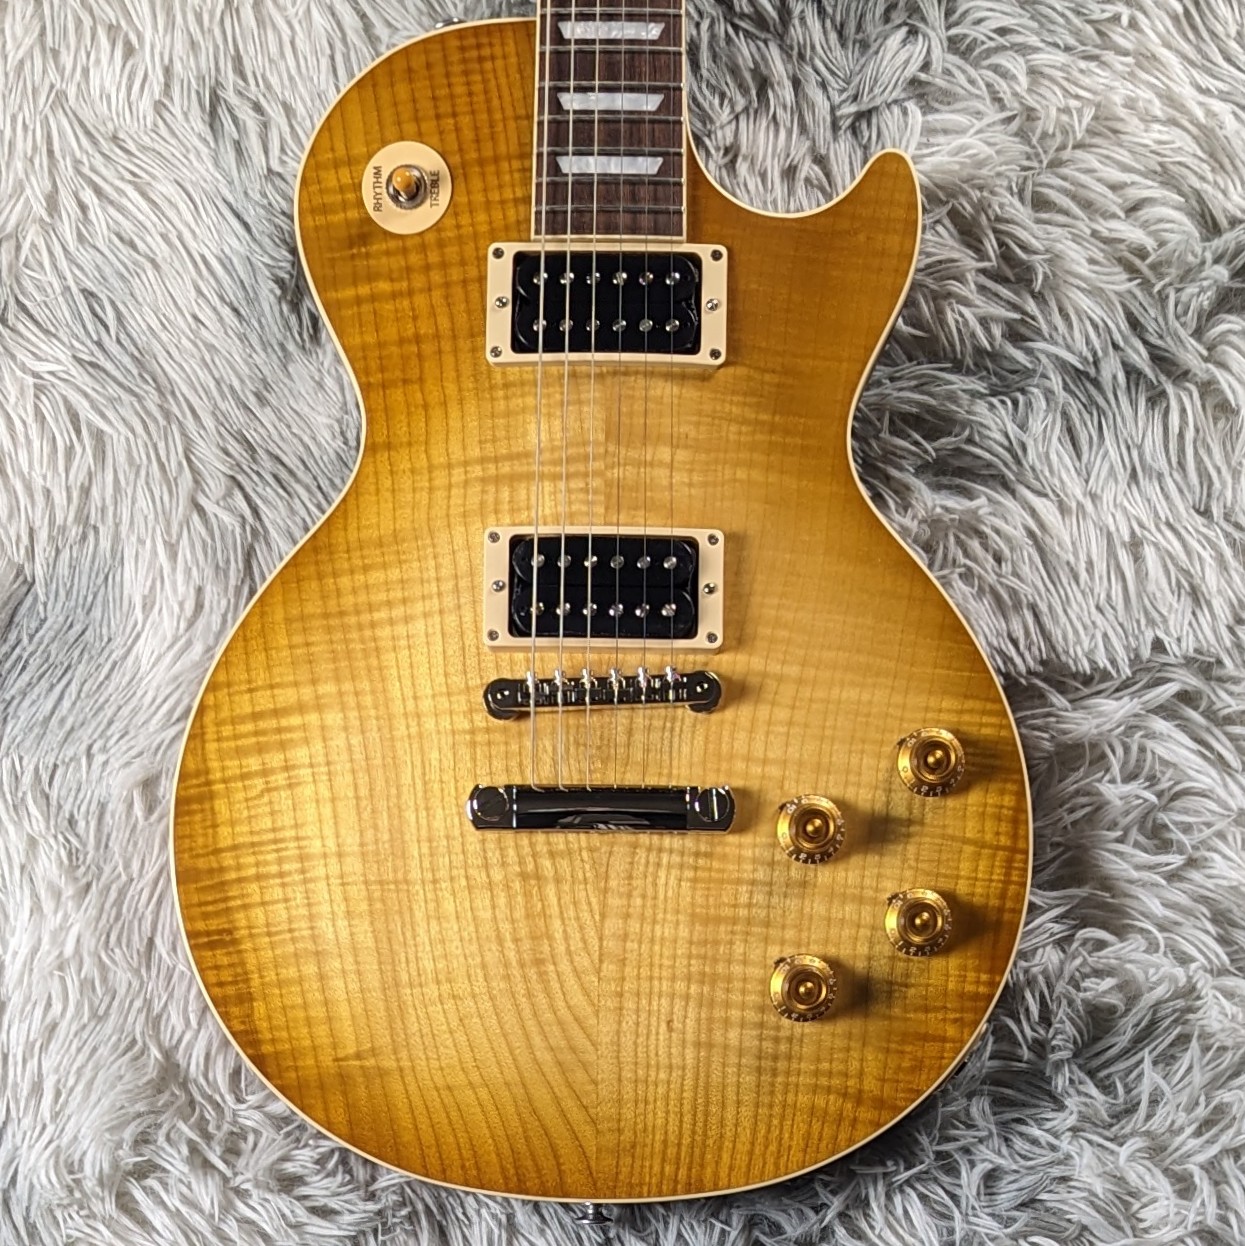 Gibson Les Paul Standard '50s Faded【現物画像】10/23更新 ギブソン